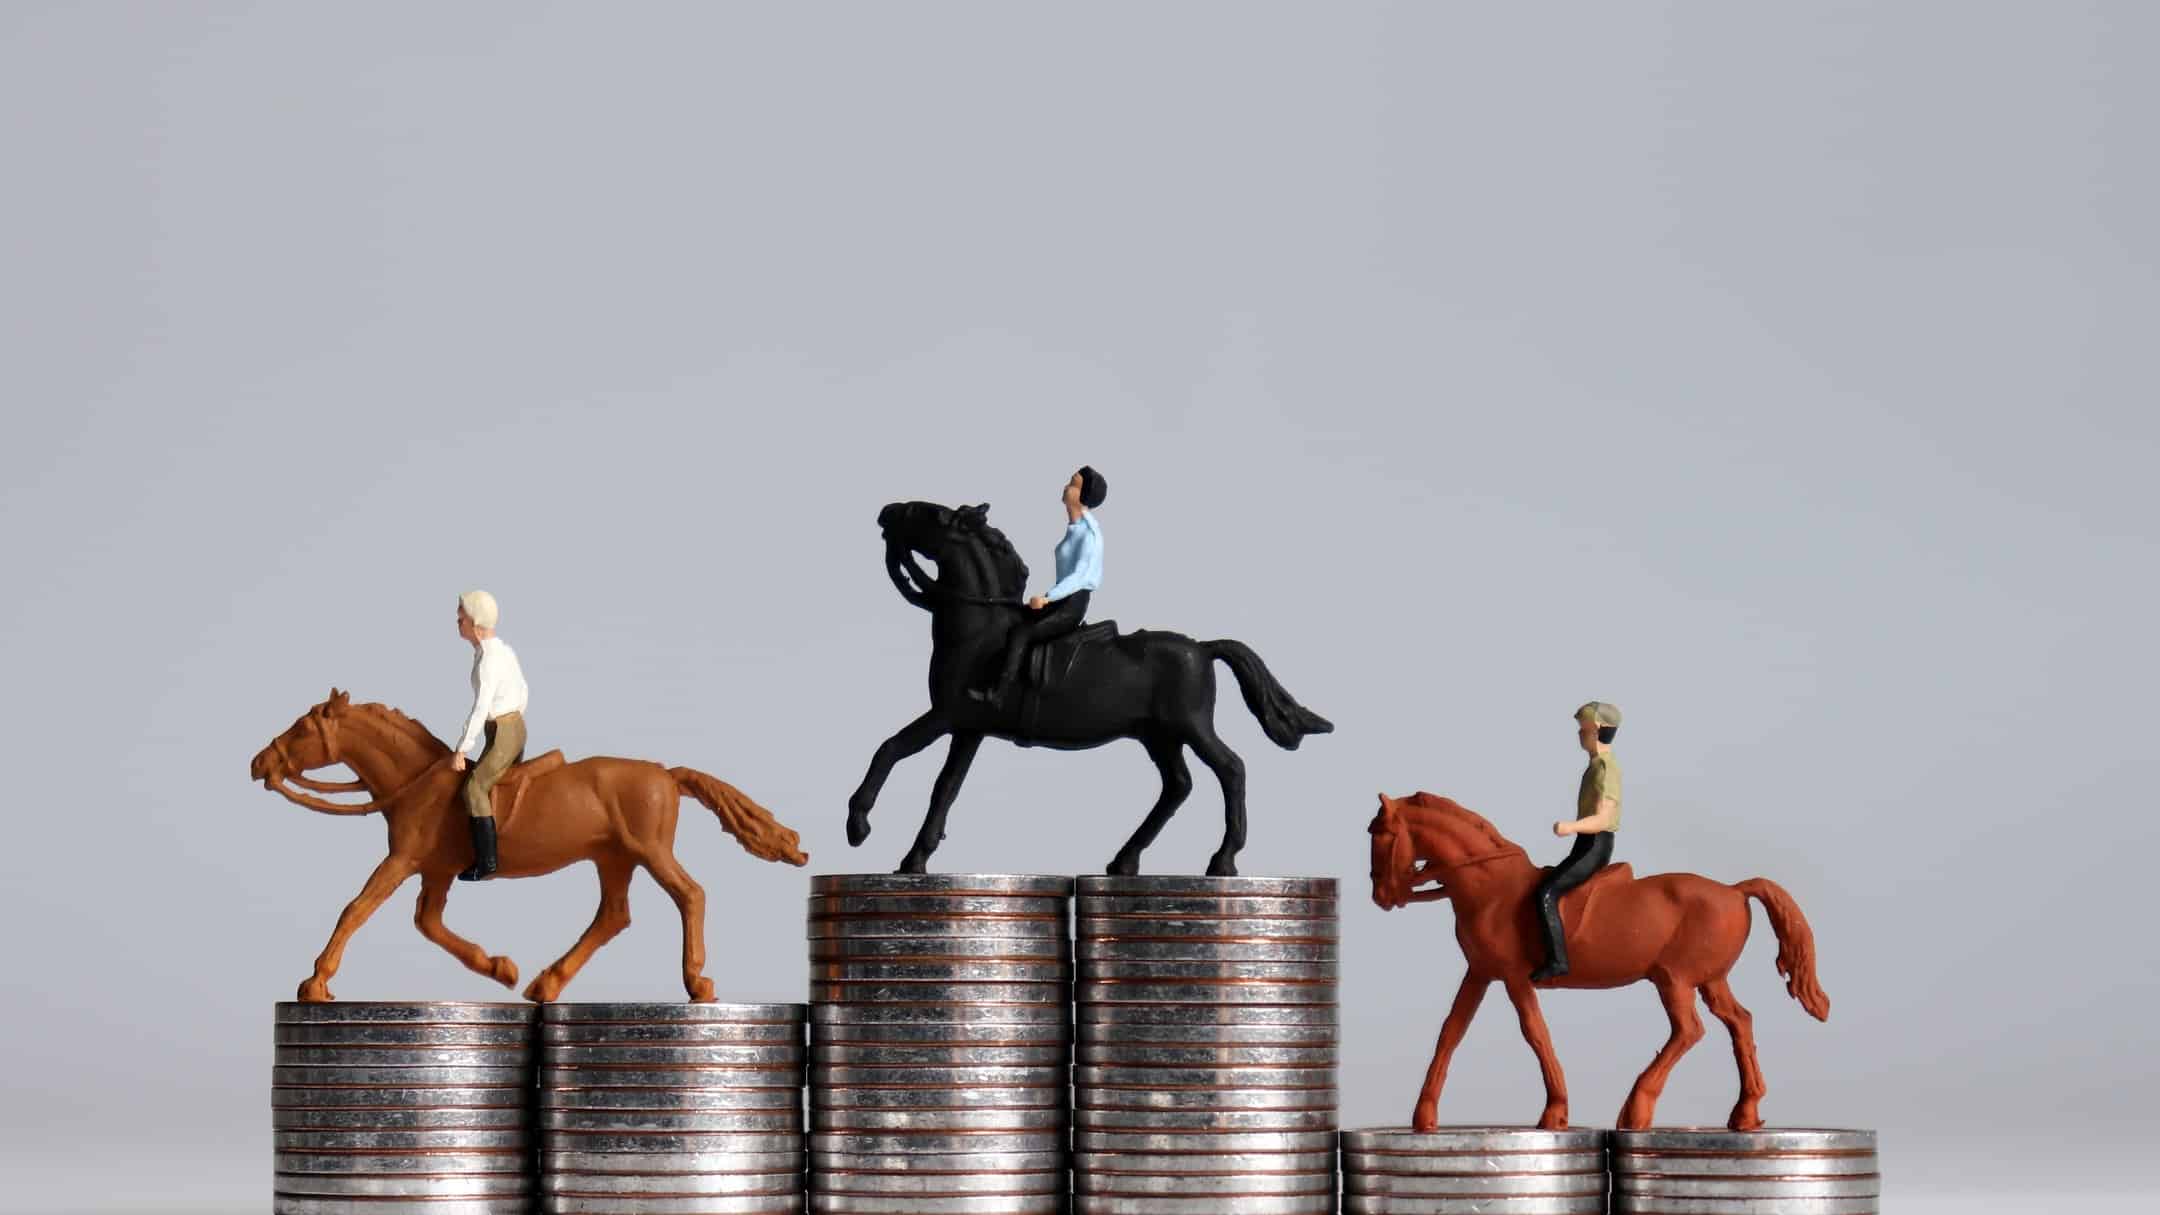 image of three small model horses with riders on top of stacks of coins of various heights.